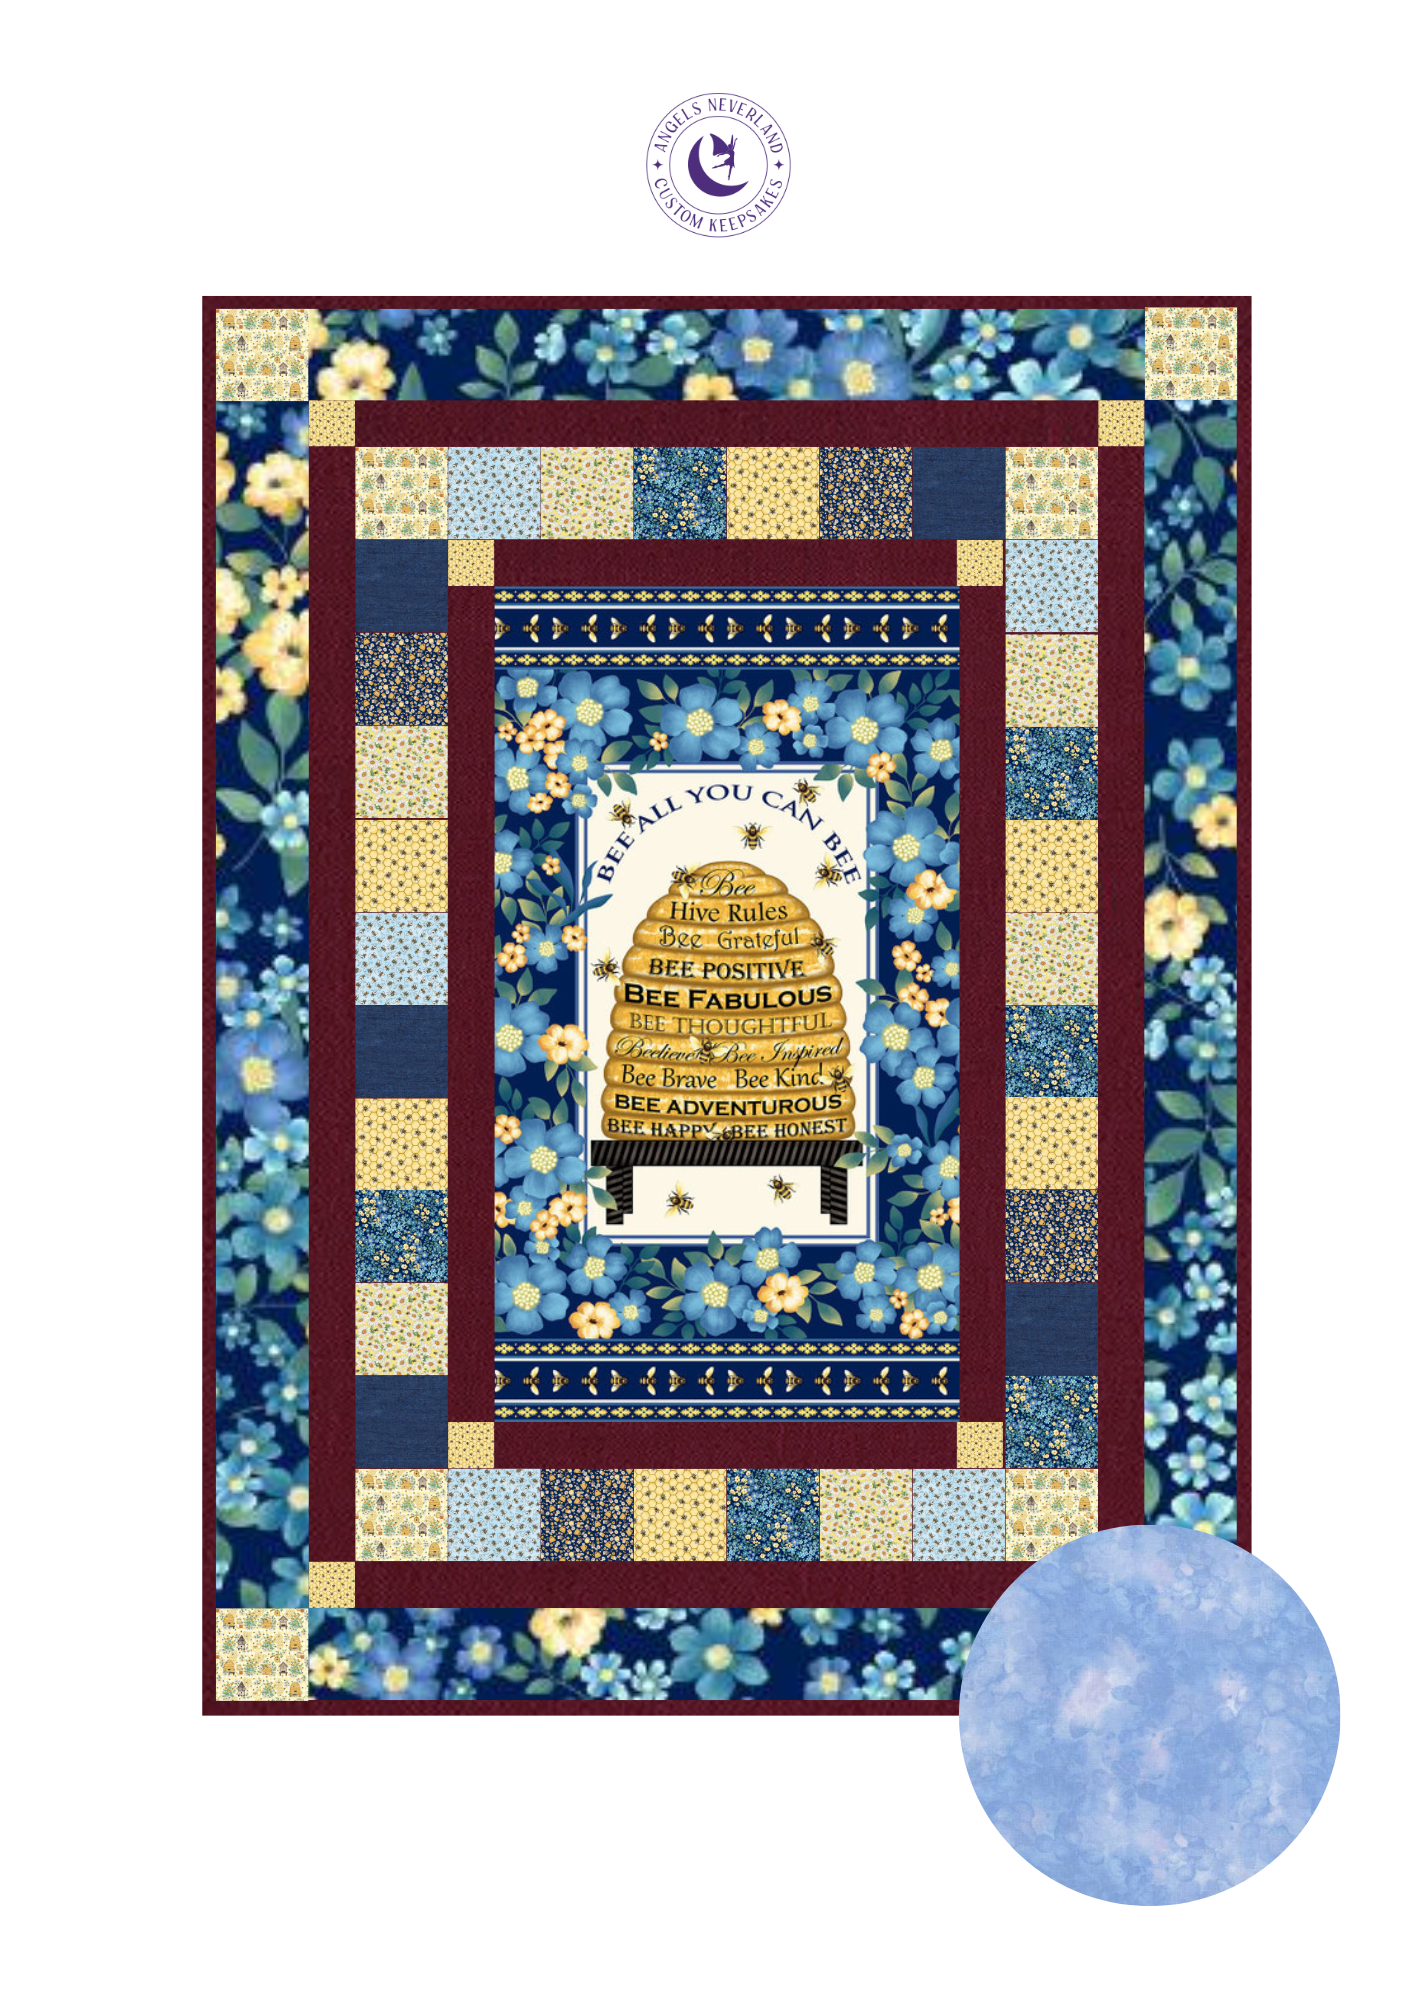 Studio E Quilt Kit Kit w/backing Sky Beginner Quilt Kit Bee All You Can Bee DIY Panel Quilt 50" x 68" approximate finished size